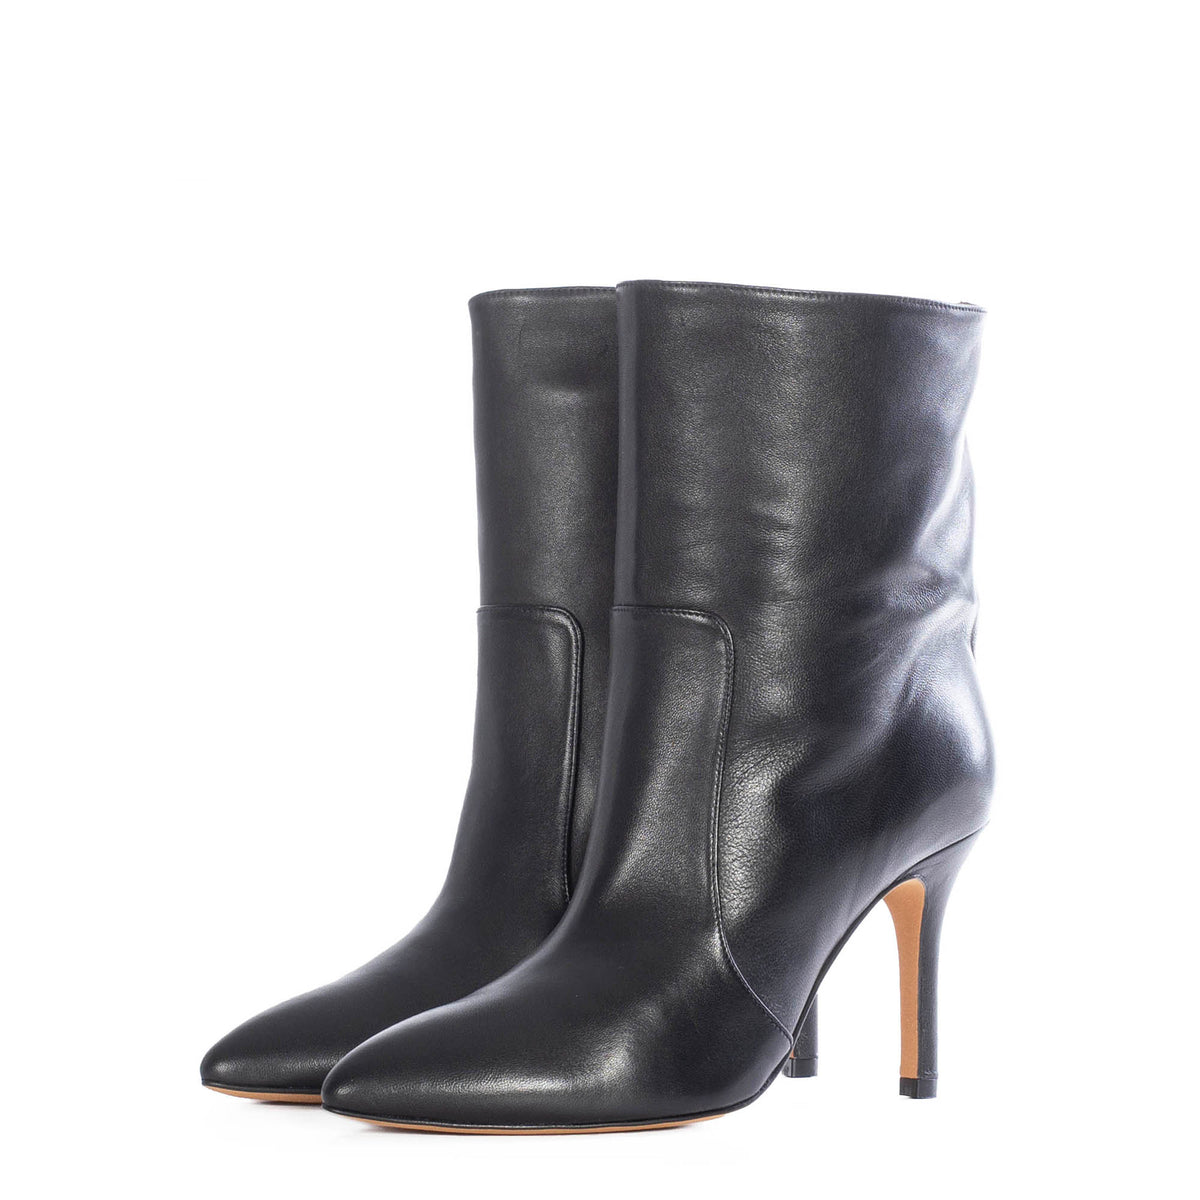 TORAL BLACK LEATHER ANKLE BOOTS – Toral